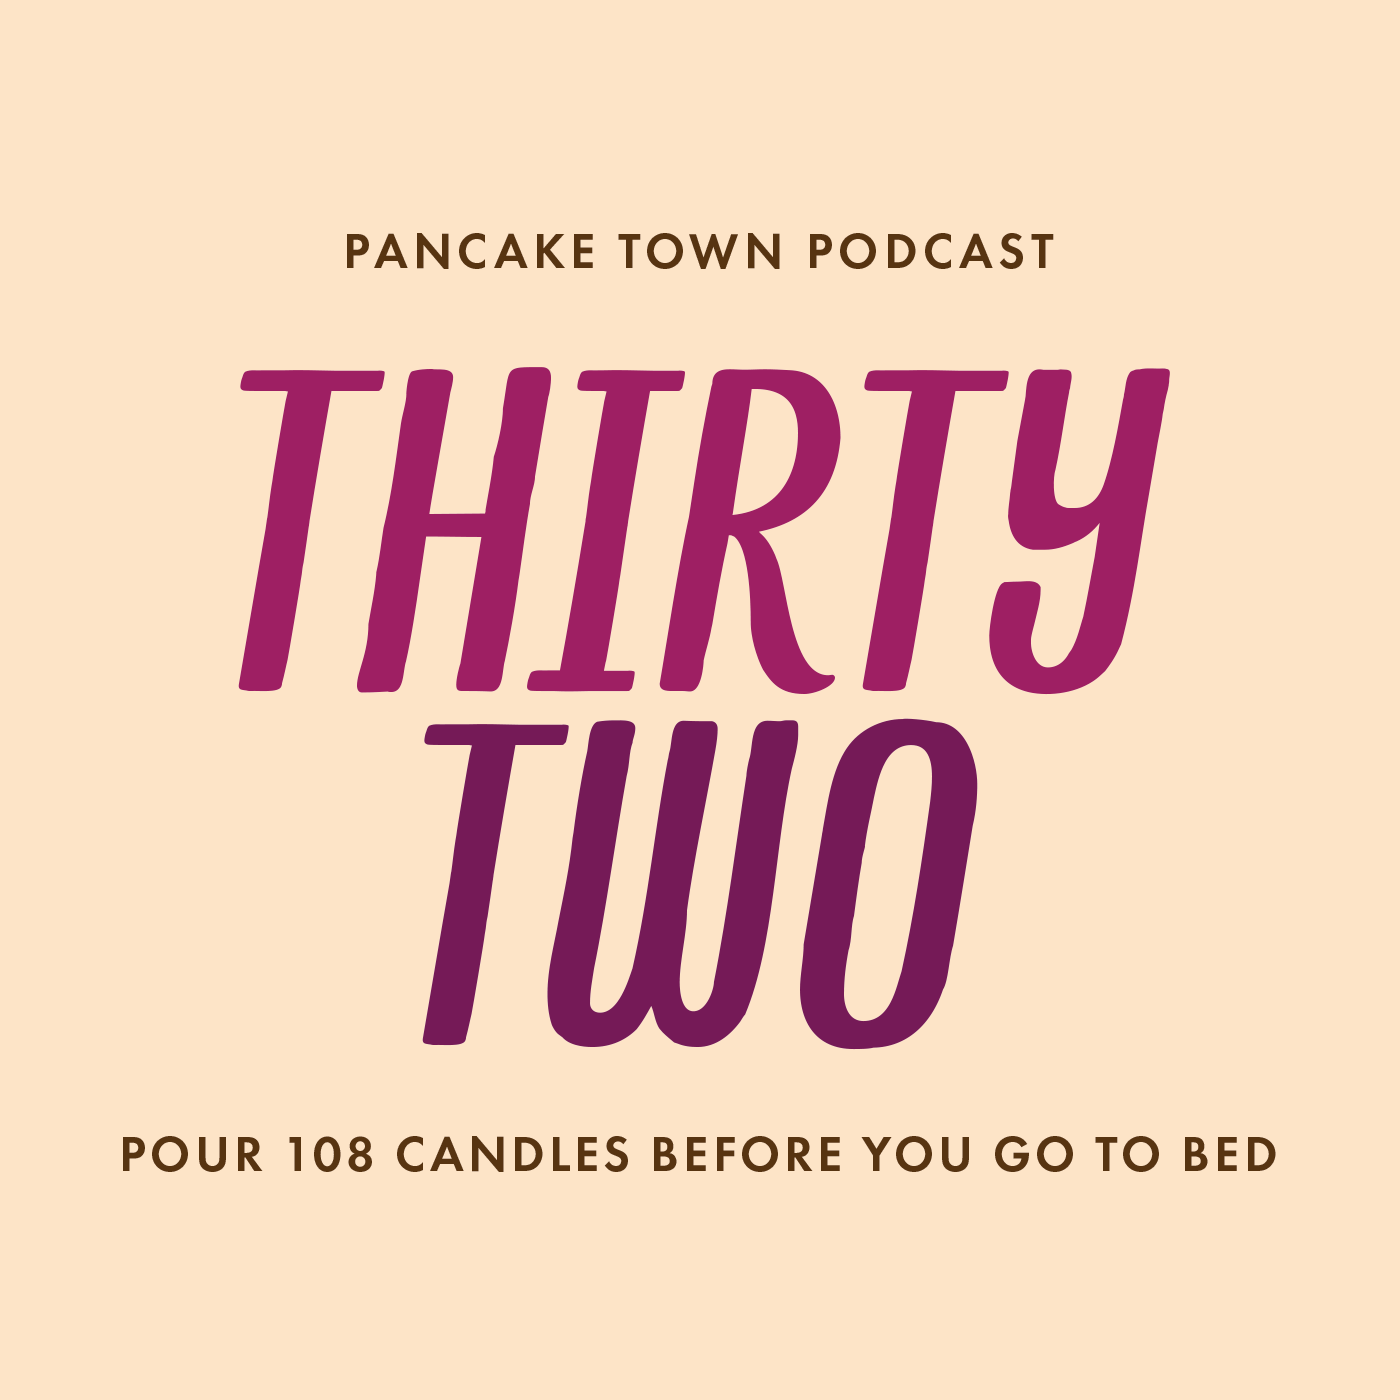 Episode 32 - Pour 108 Candles Before You Go To Bed